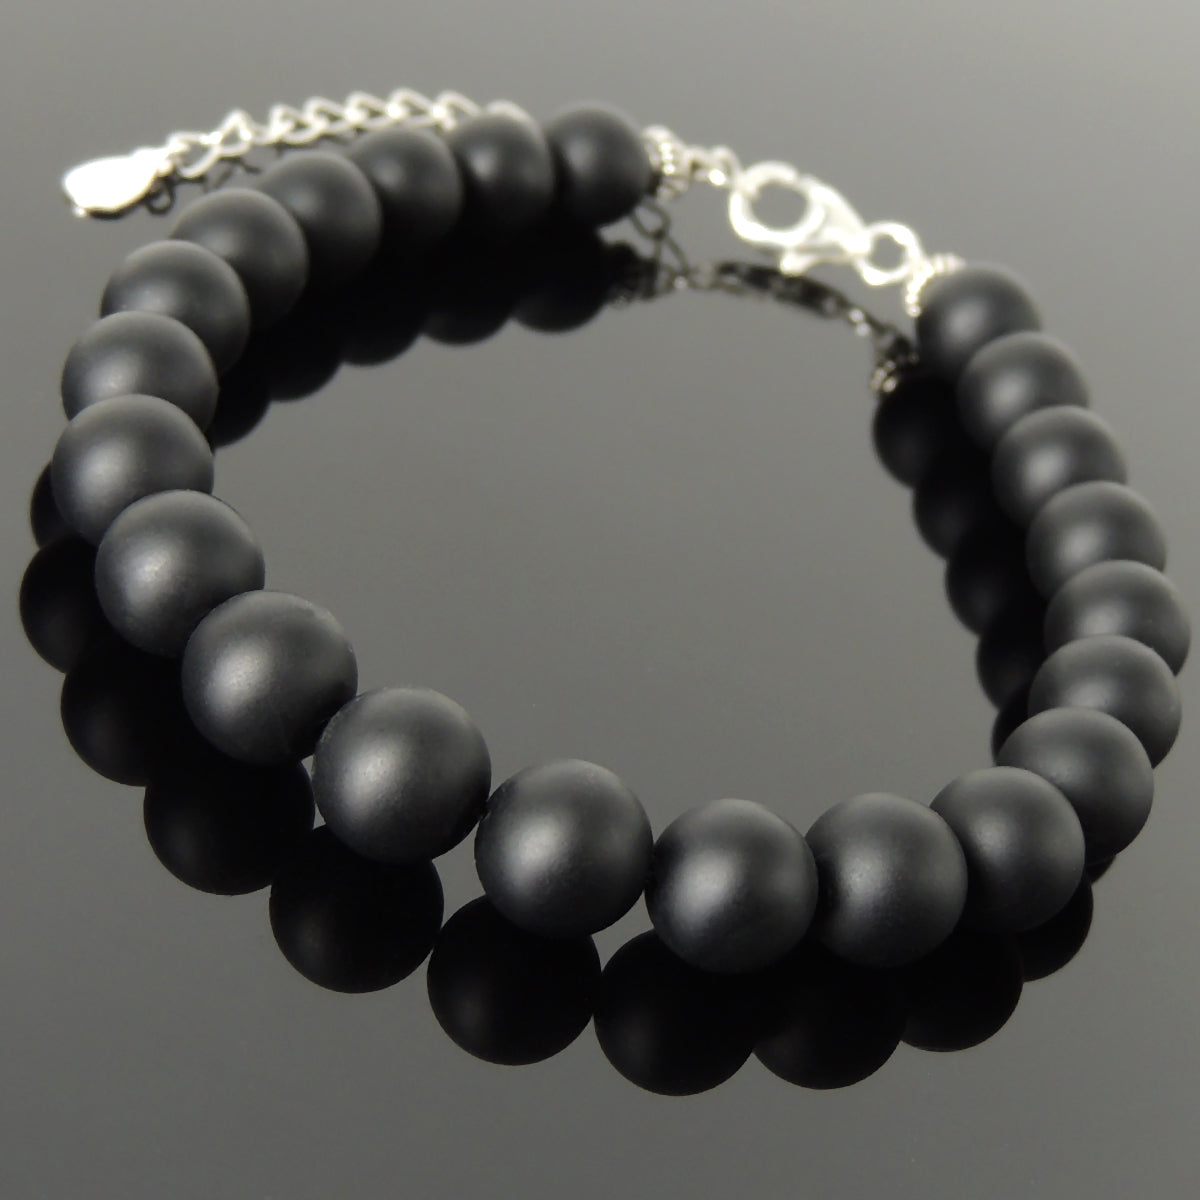 8mm Matte Black Onyx Healing Gemstone Bracelet with S925 Sterling Silver Beads, Chain, & Clasp - Handmade by Gem & Silver BR1355